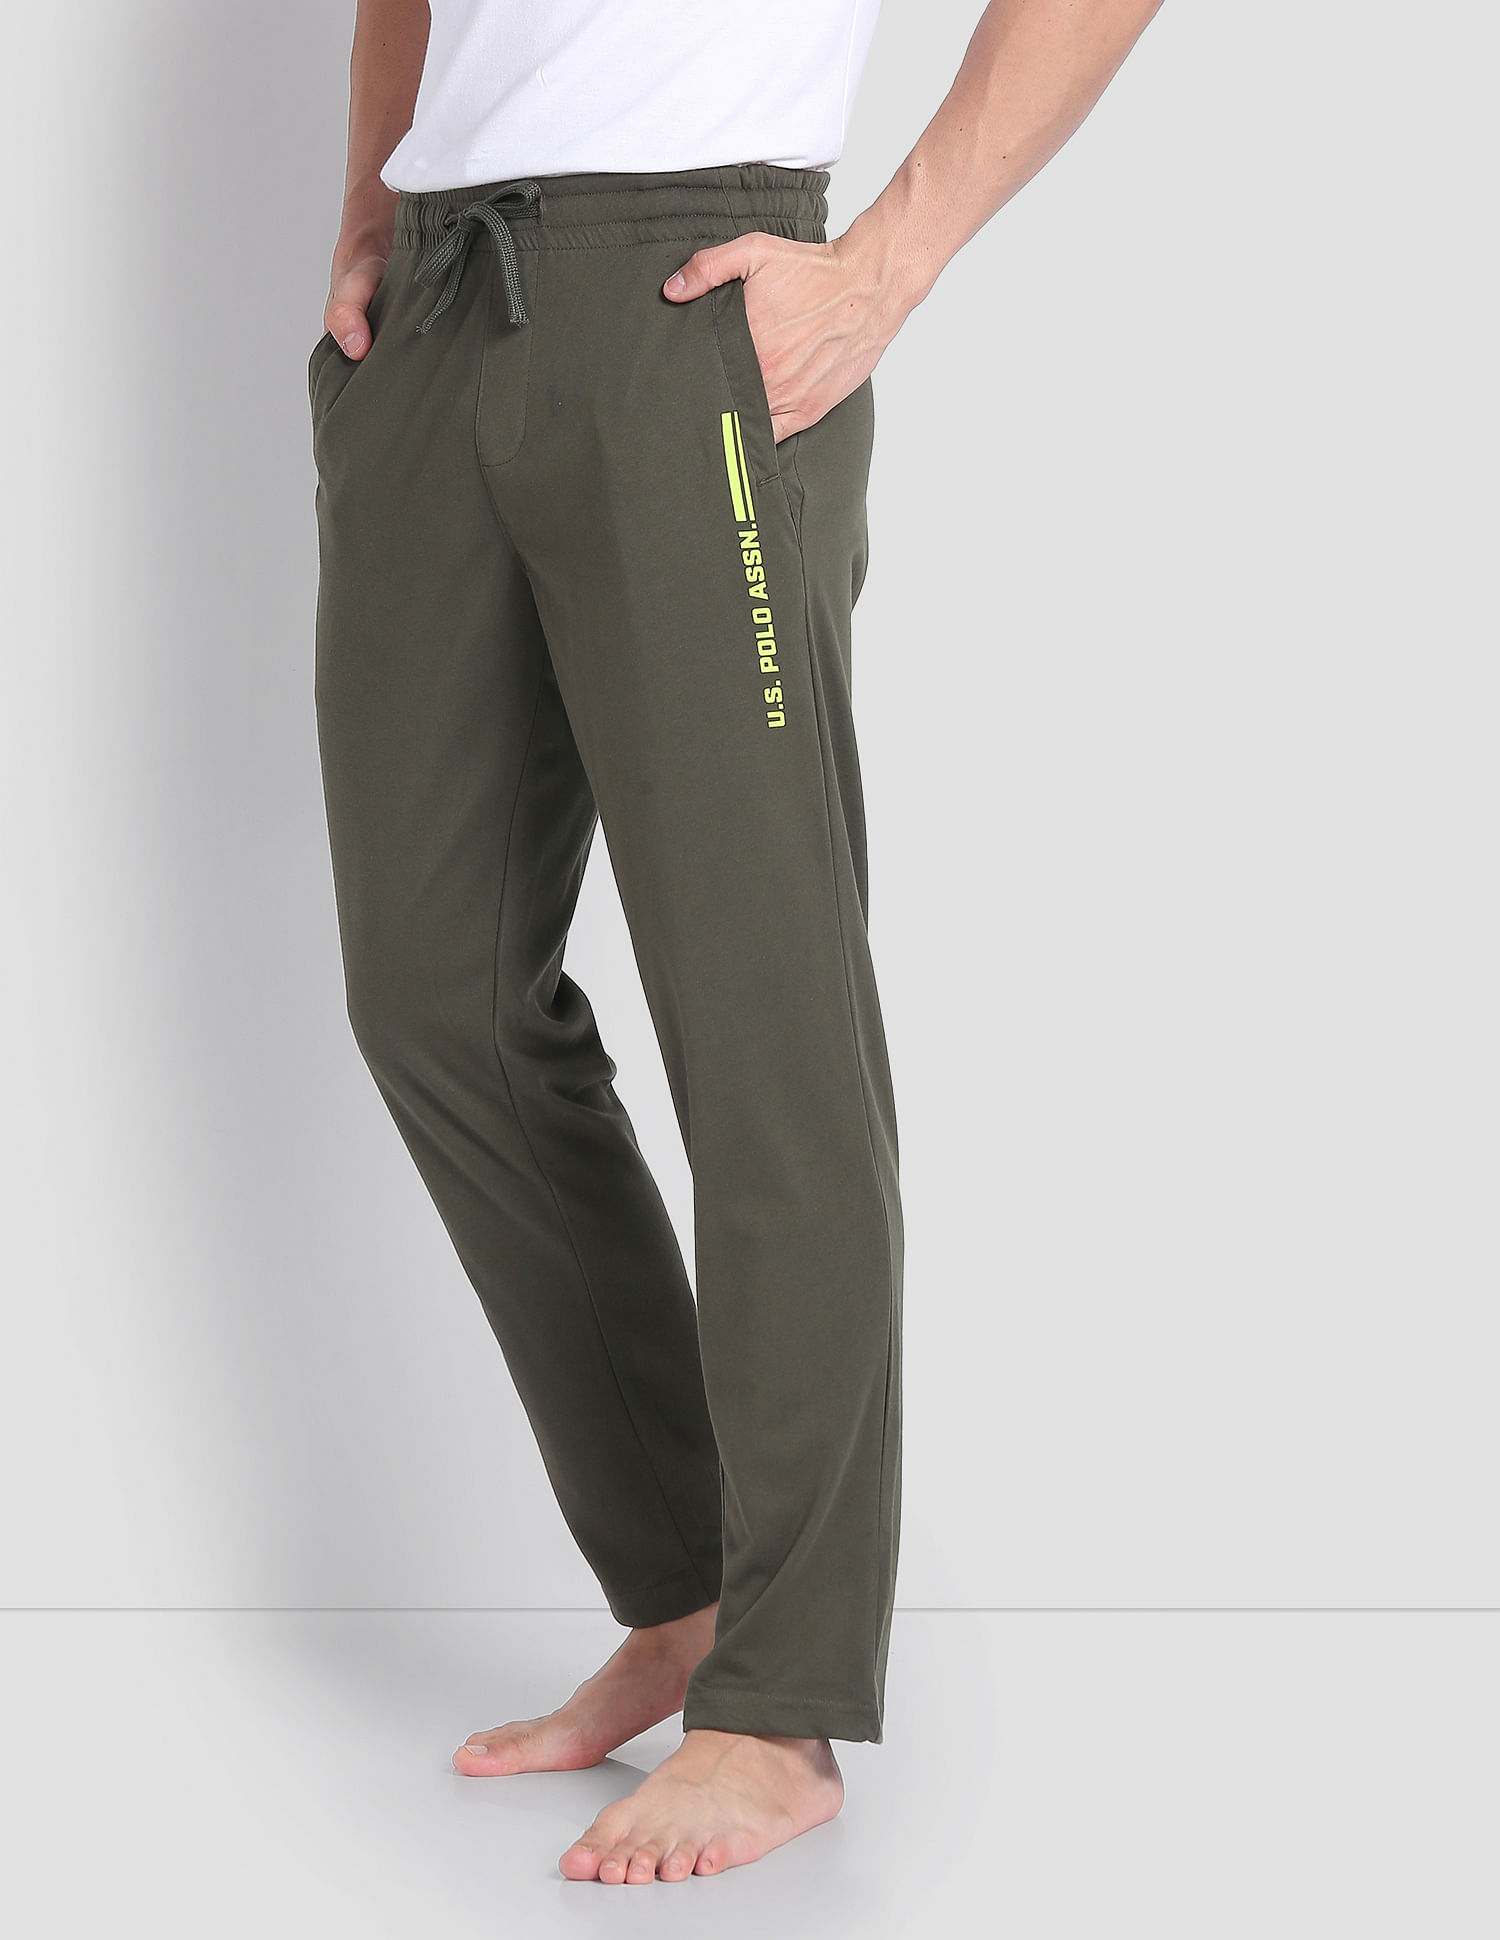 Buy U.S. POLO ASSN. Solid Cotton Relaxed Fit Boys Trousers | Shoppers Stop